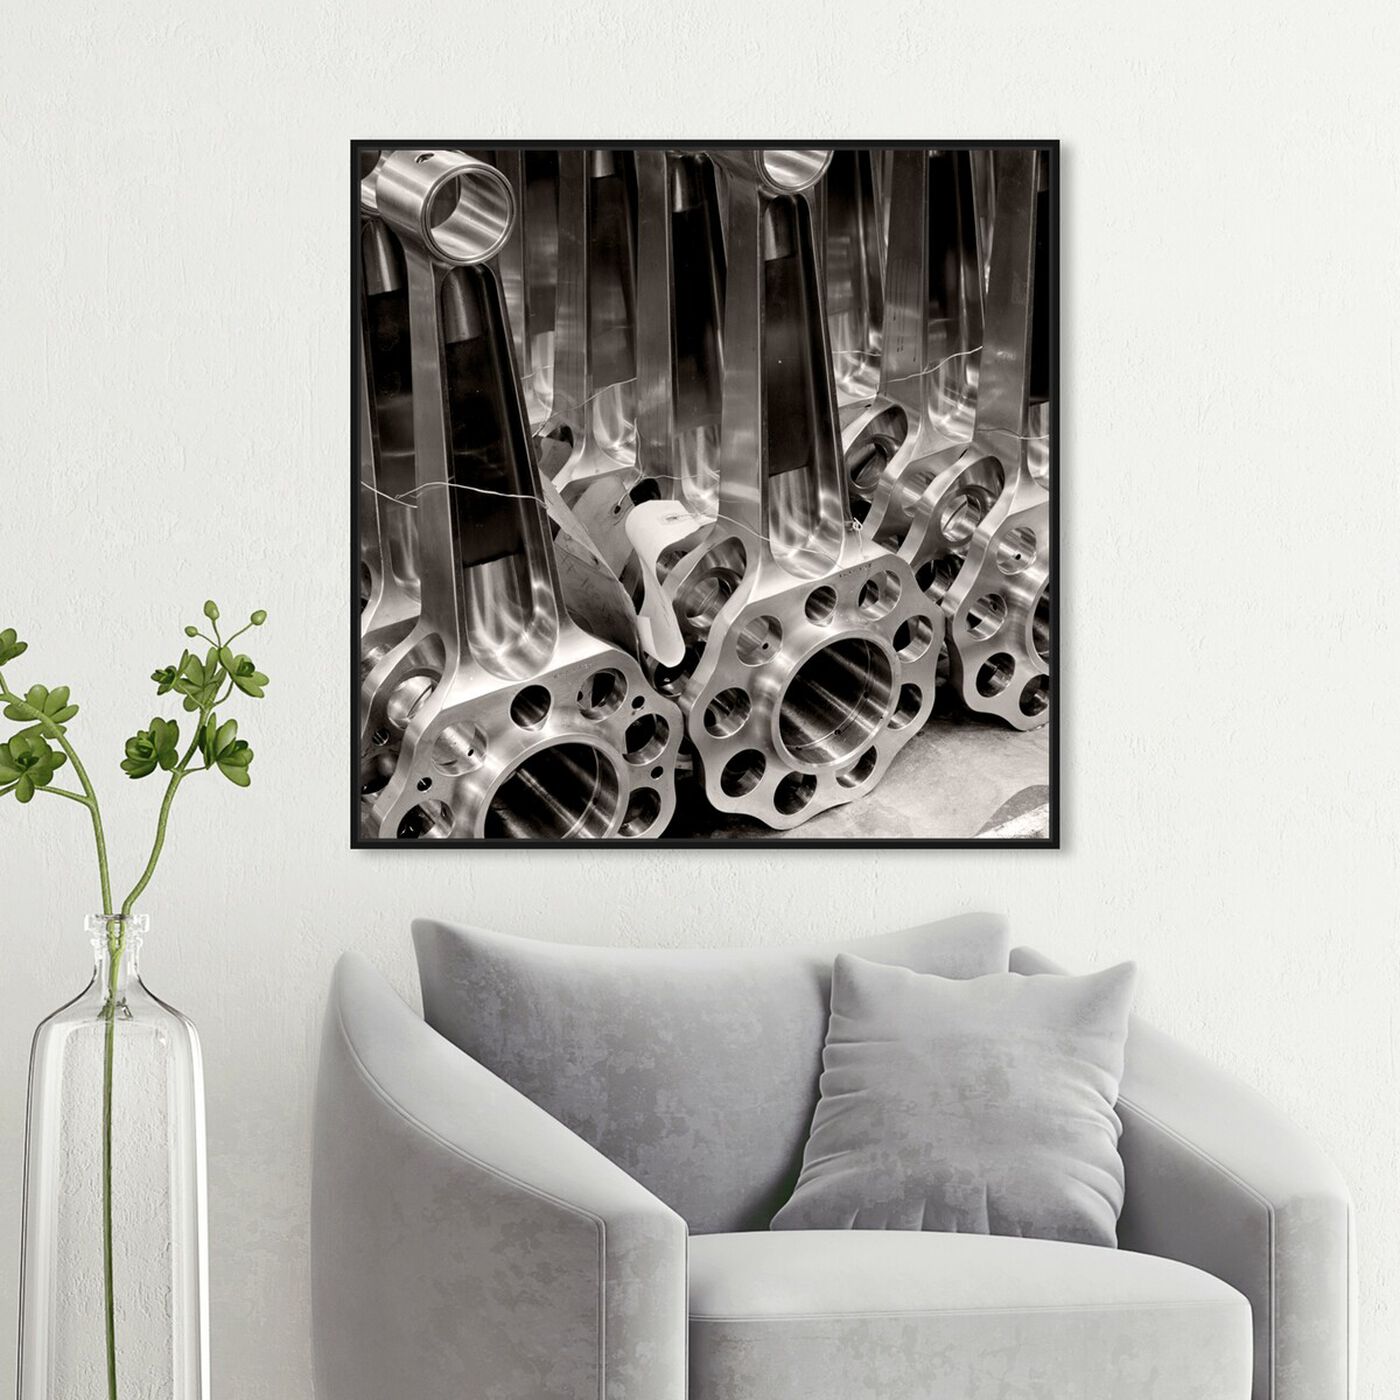 Hanging view of Airplane Parts 1 featuring transportation and airplanes art.